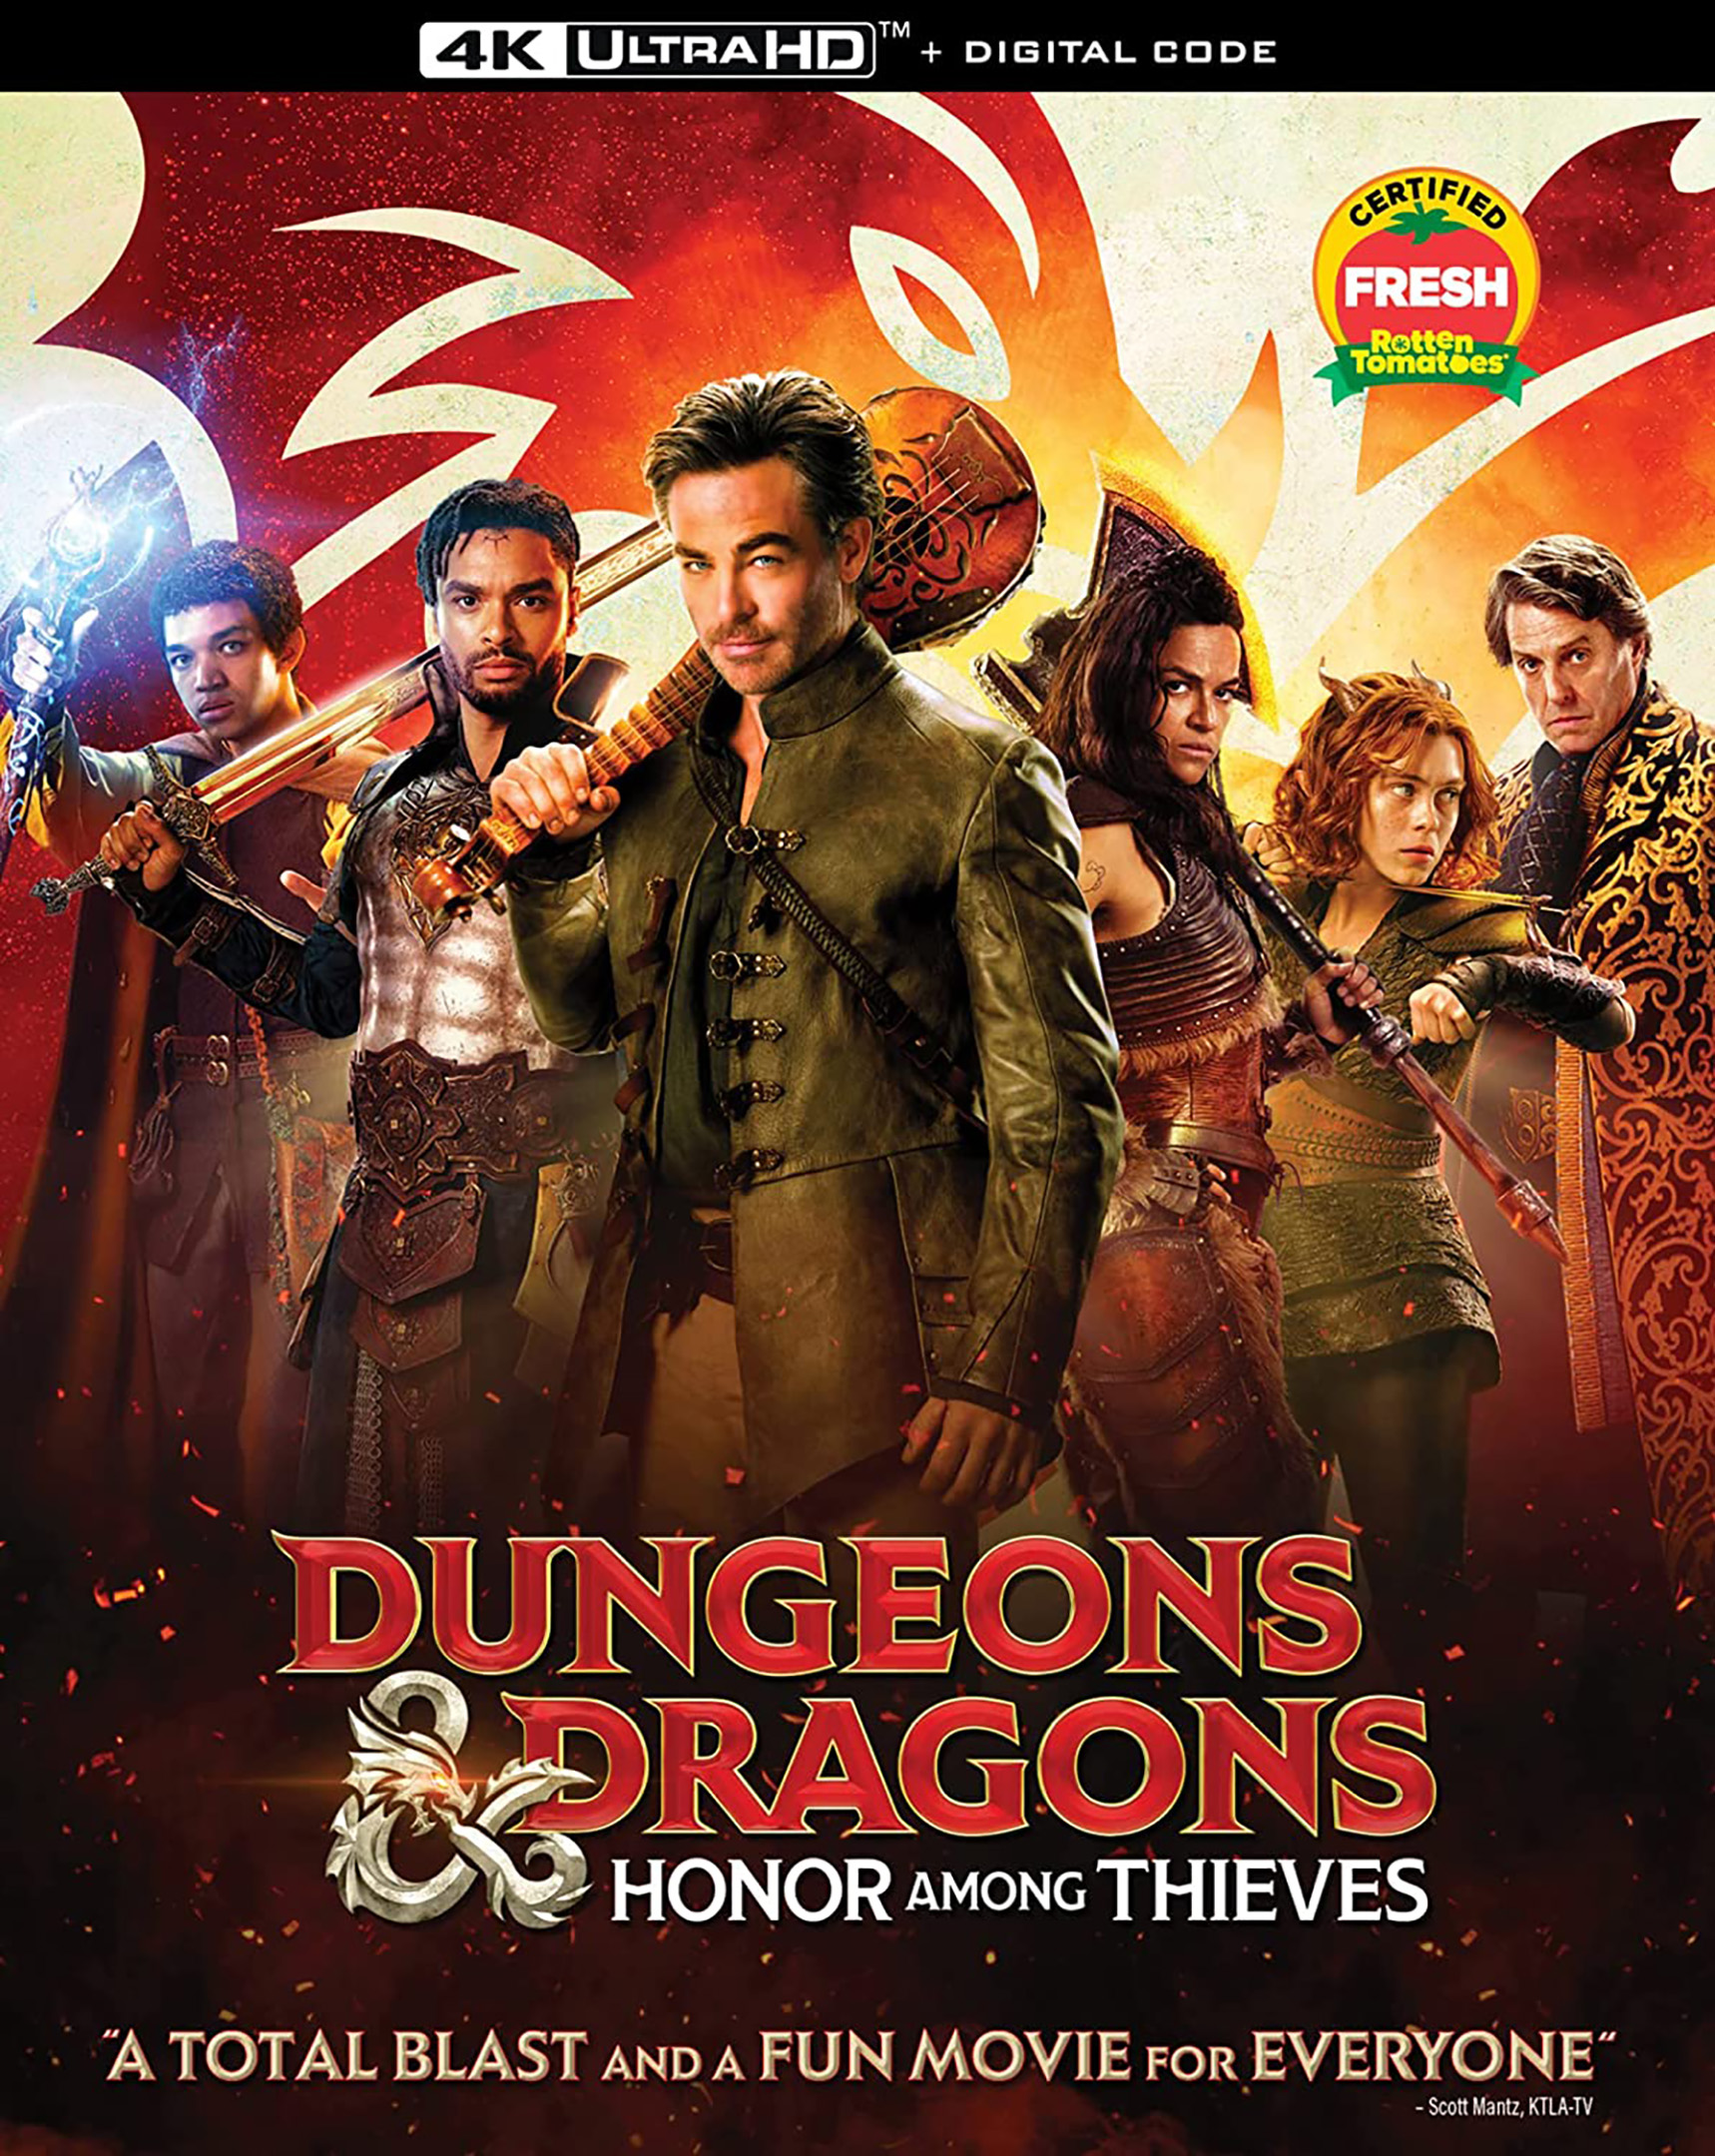 Dungeons & dragons honor among thieves download